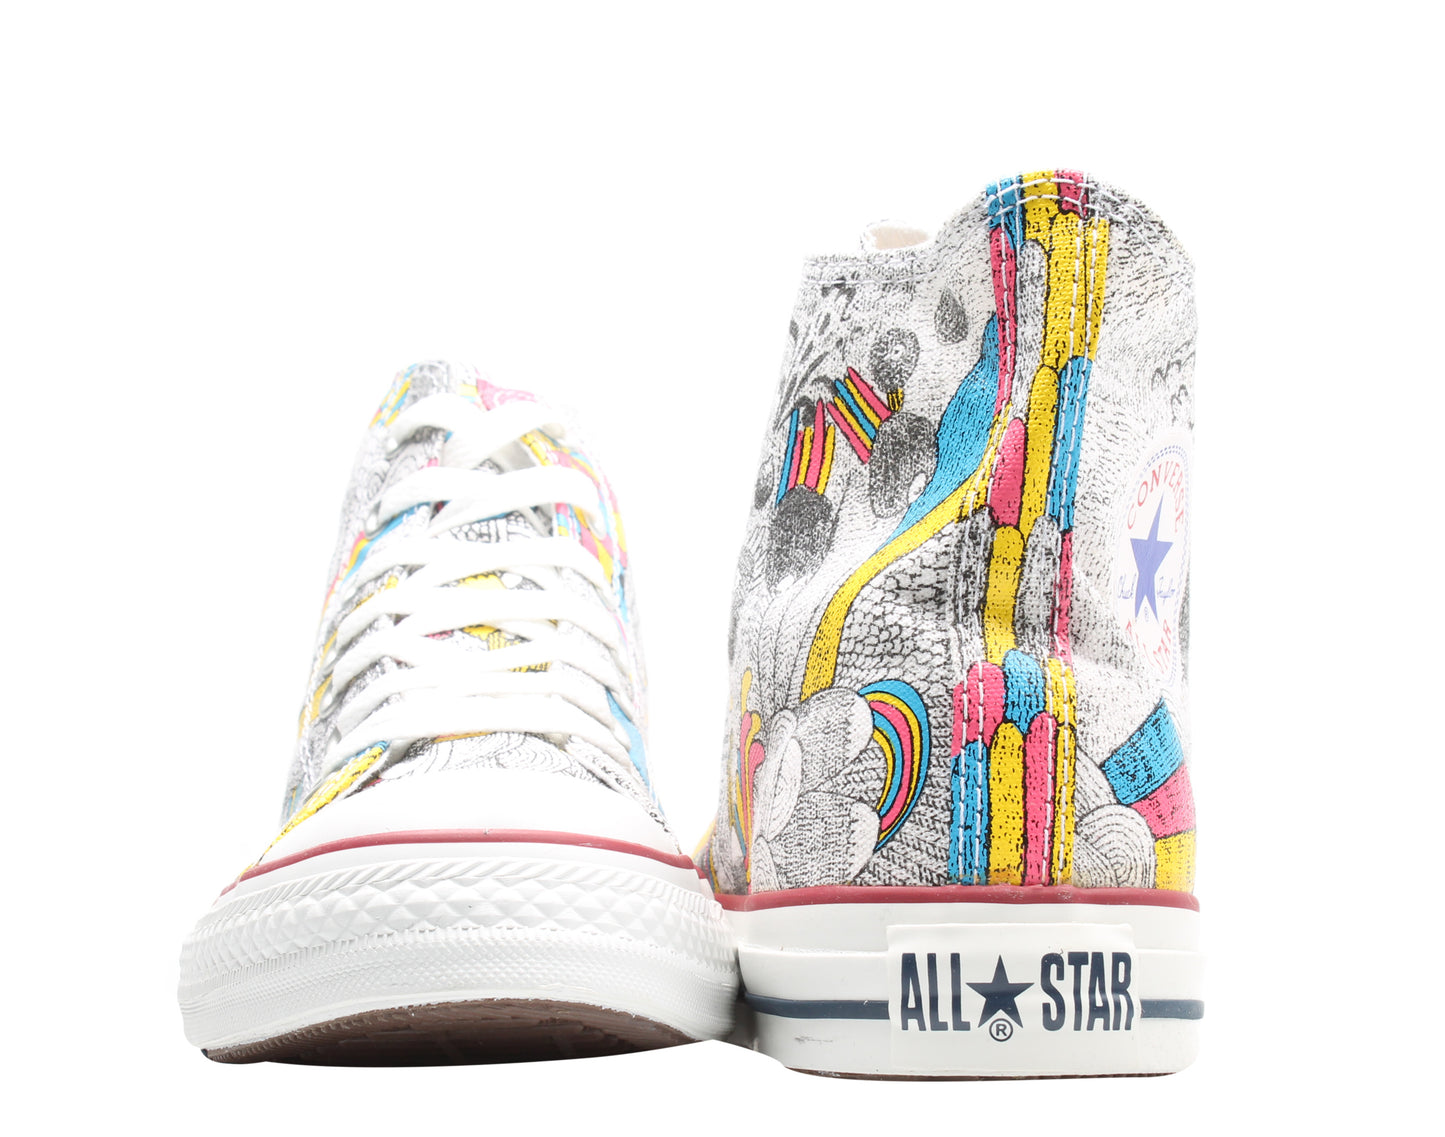 Converse Chuck Taylor All Star Product Democracy Hi Sneakers